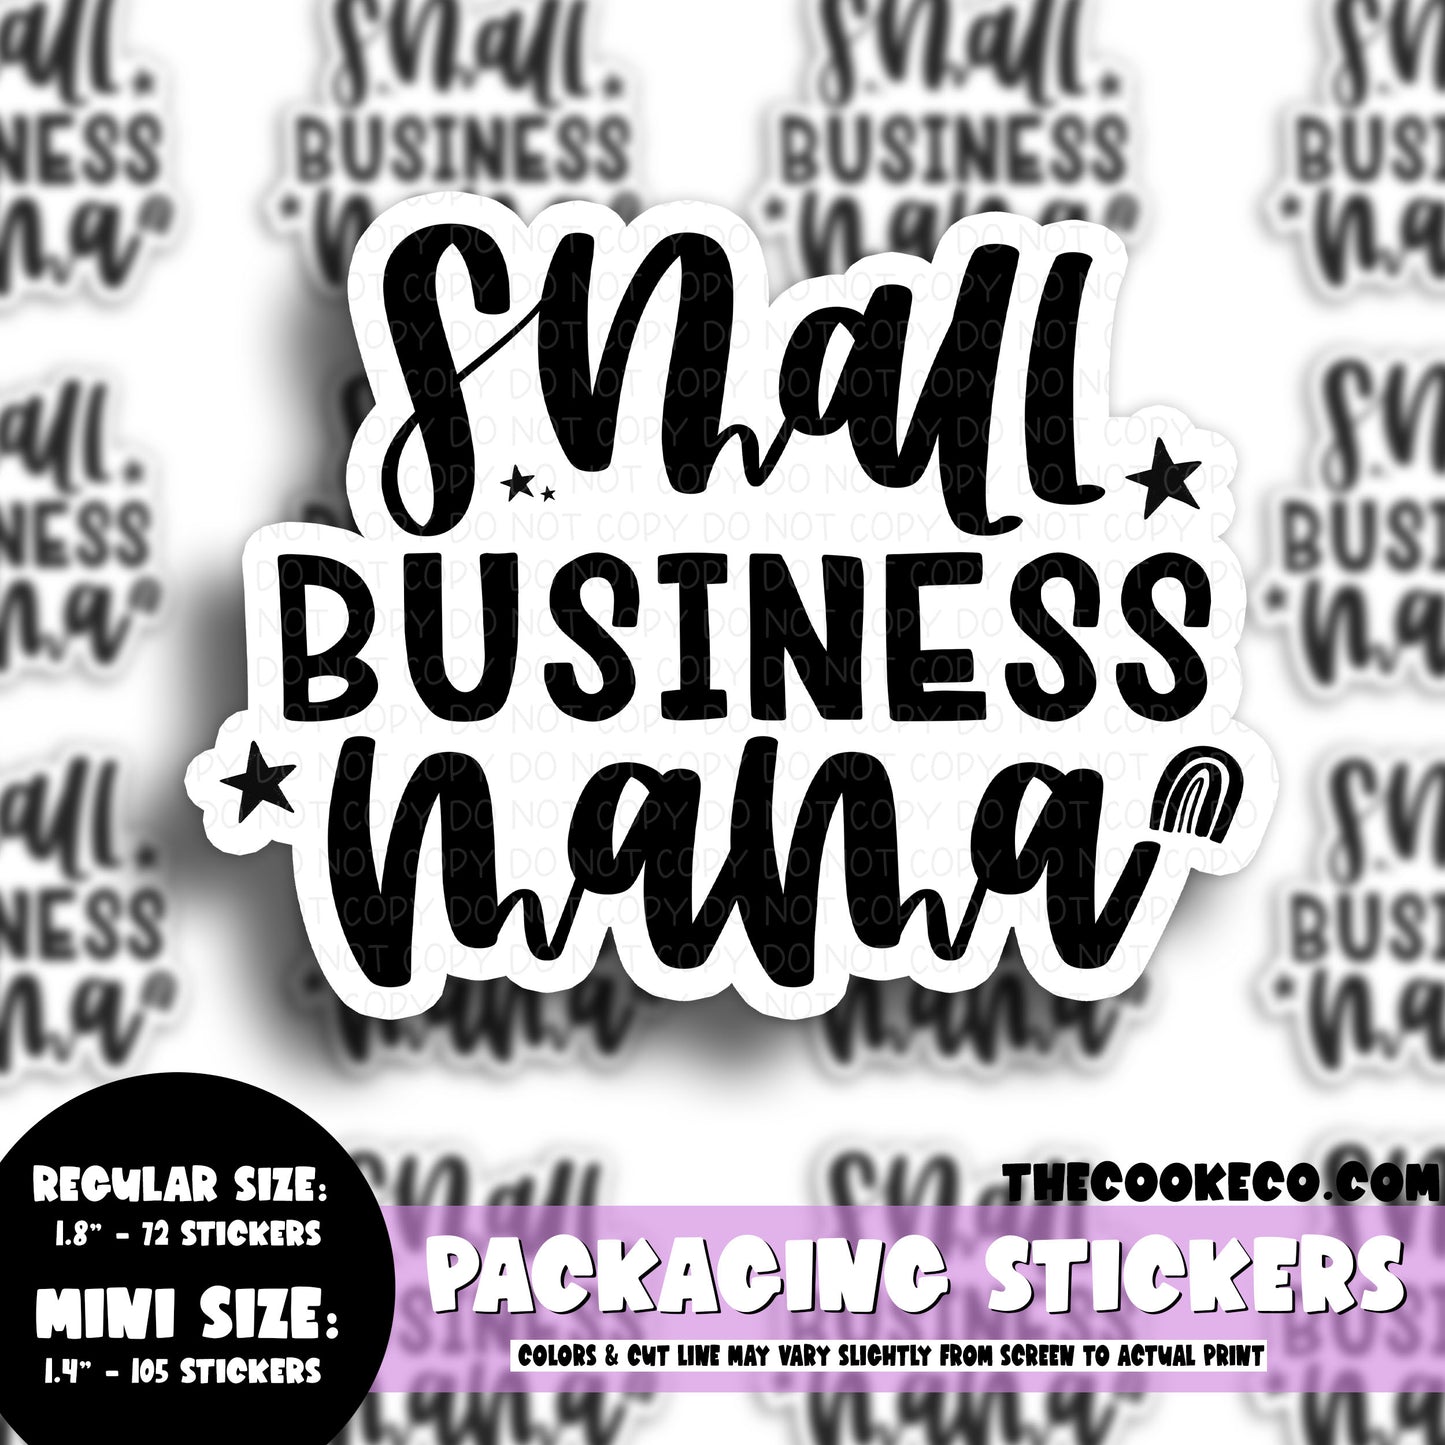 Packaging Stickers | #BW0205 - SMALL BUSINESS MAMA